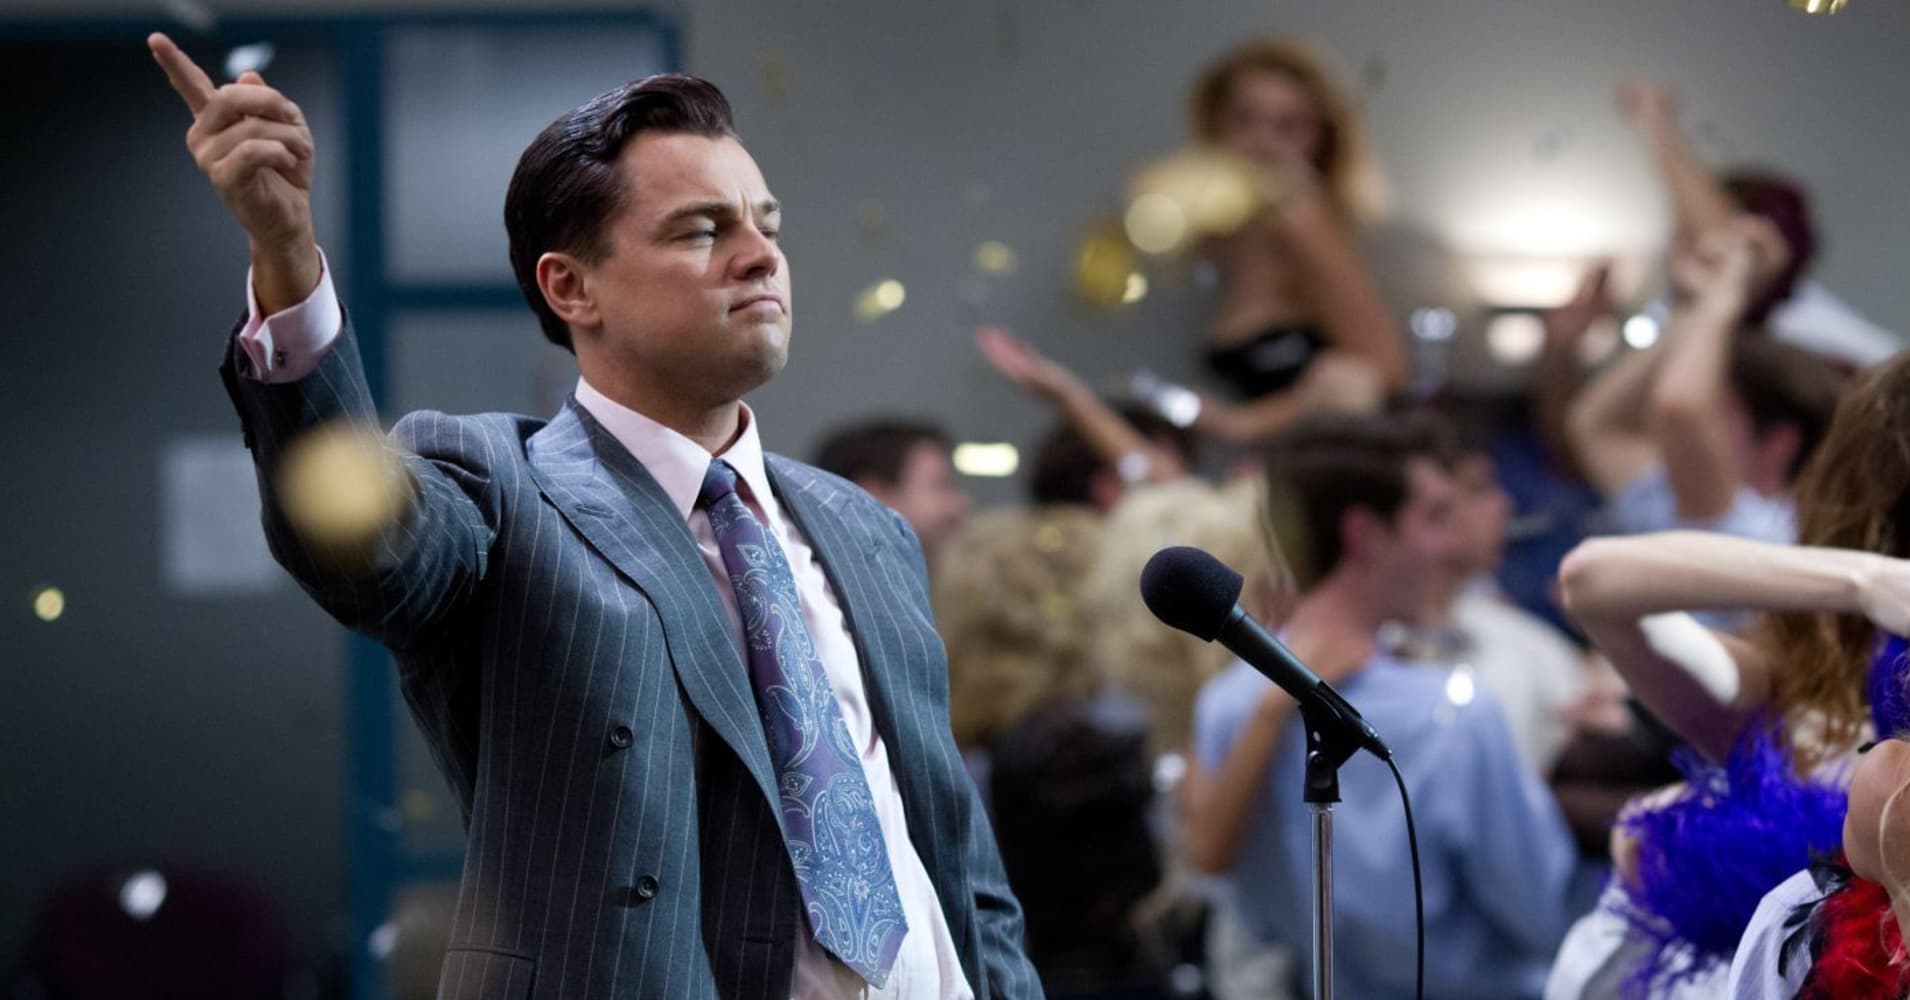 A scene from "The Wolf of Wall Street" starring Leonardo DiCaprio